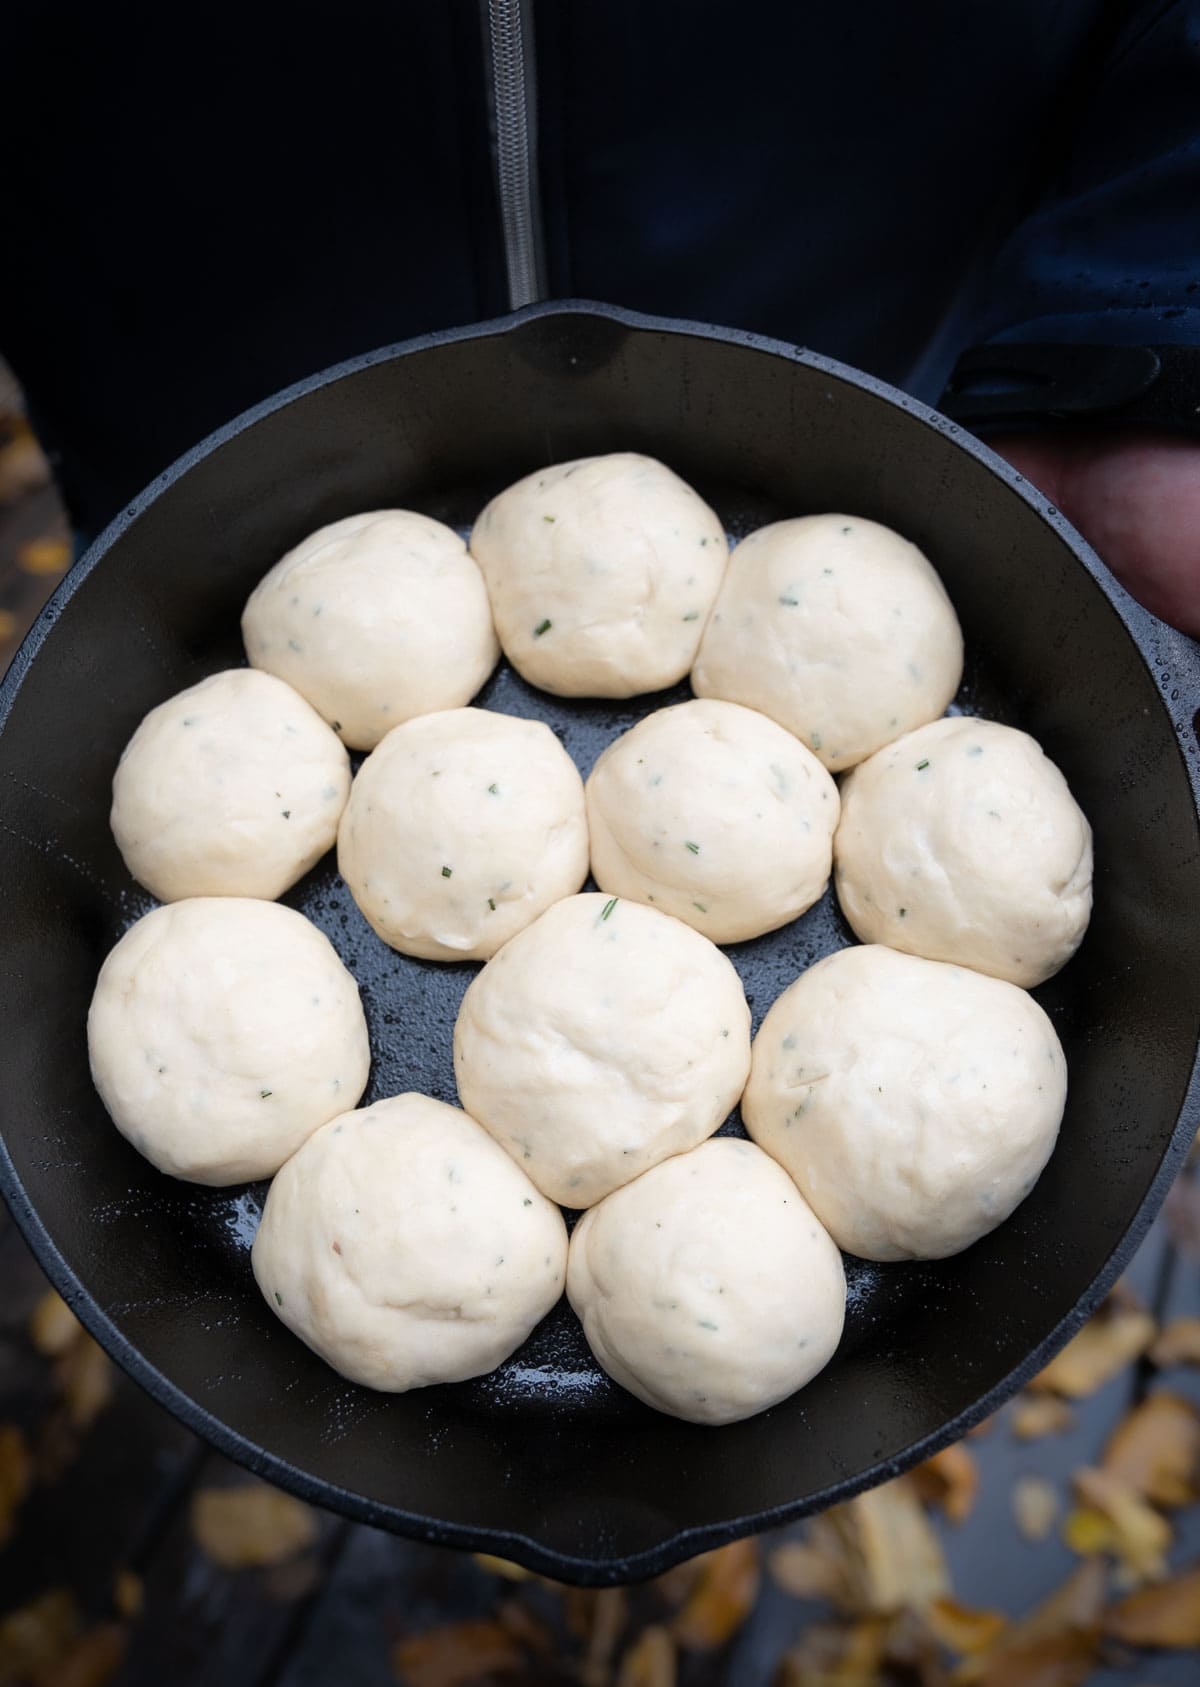 Quick-rise yeast dough balls unbaked in a cast iron pan ready to rise.